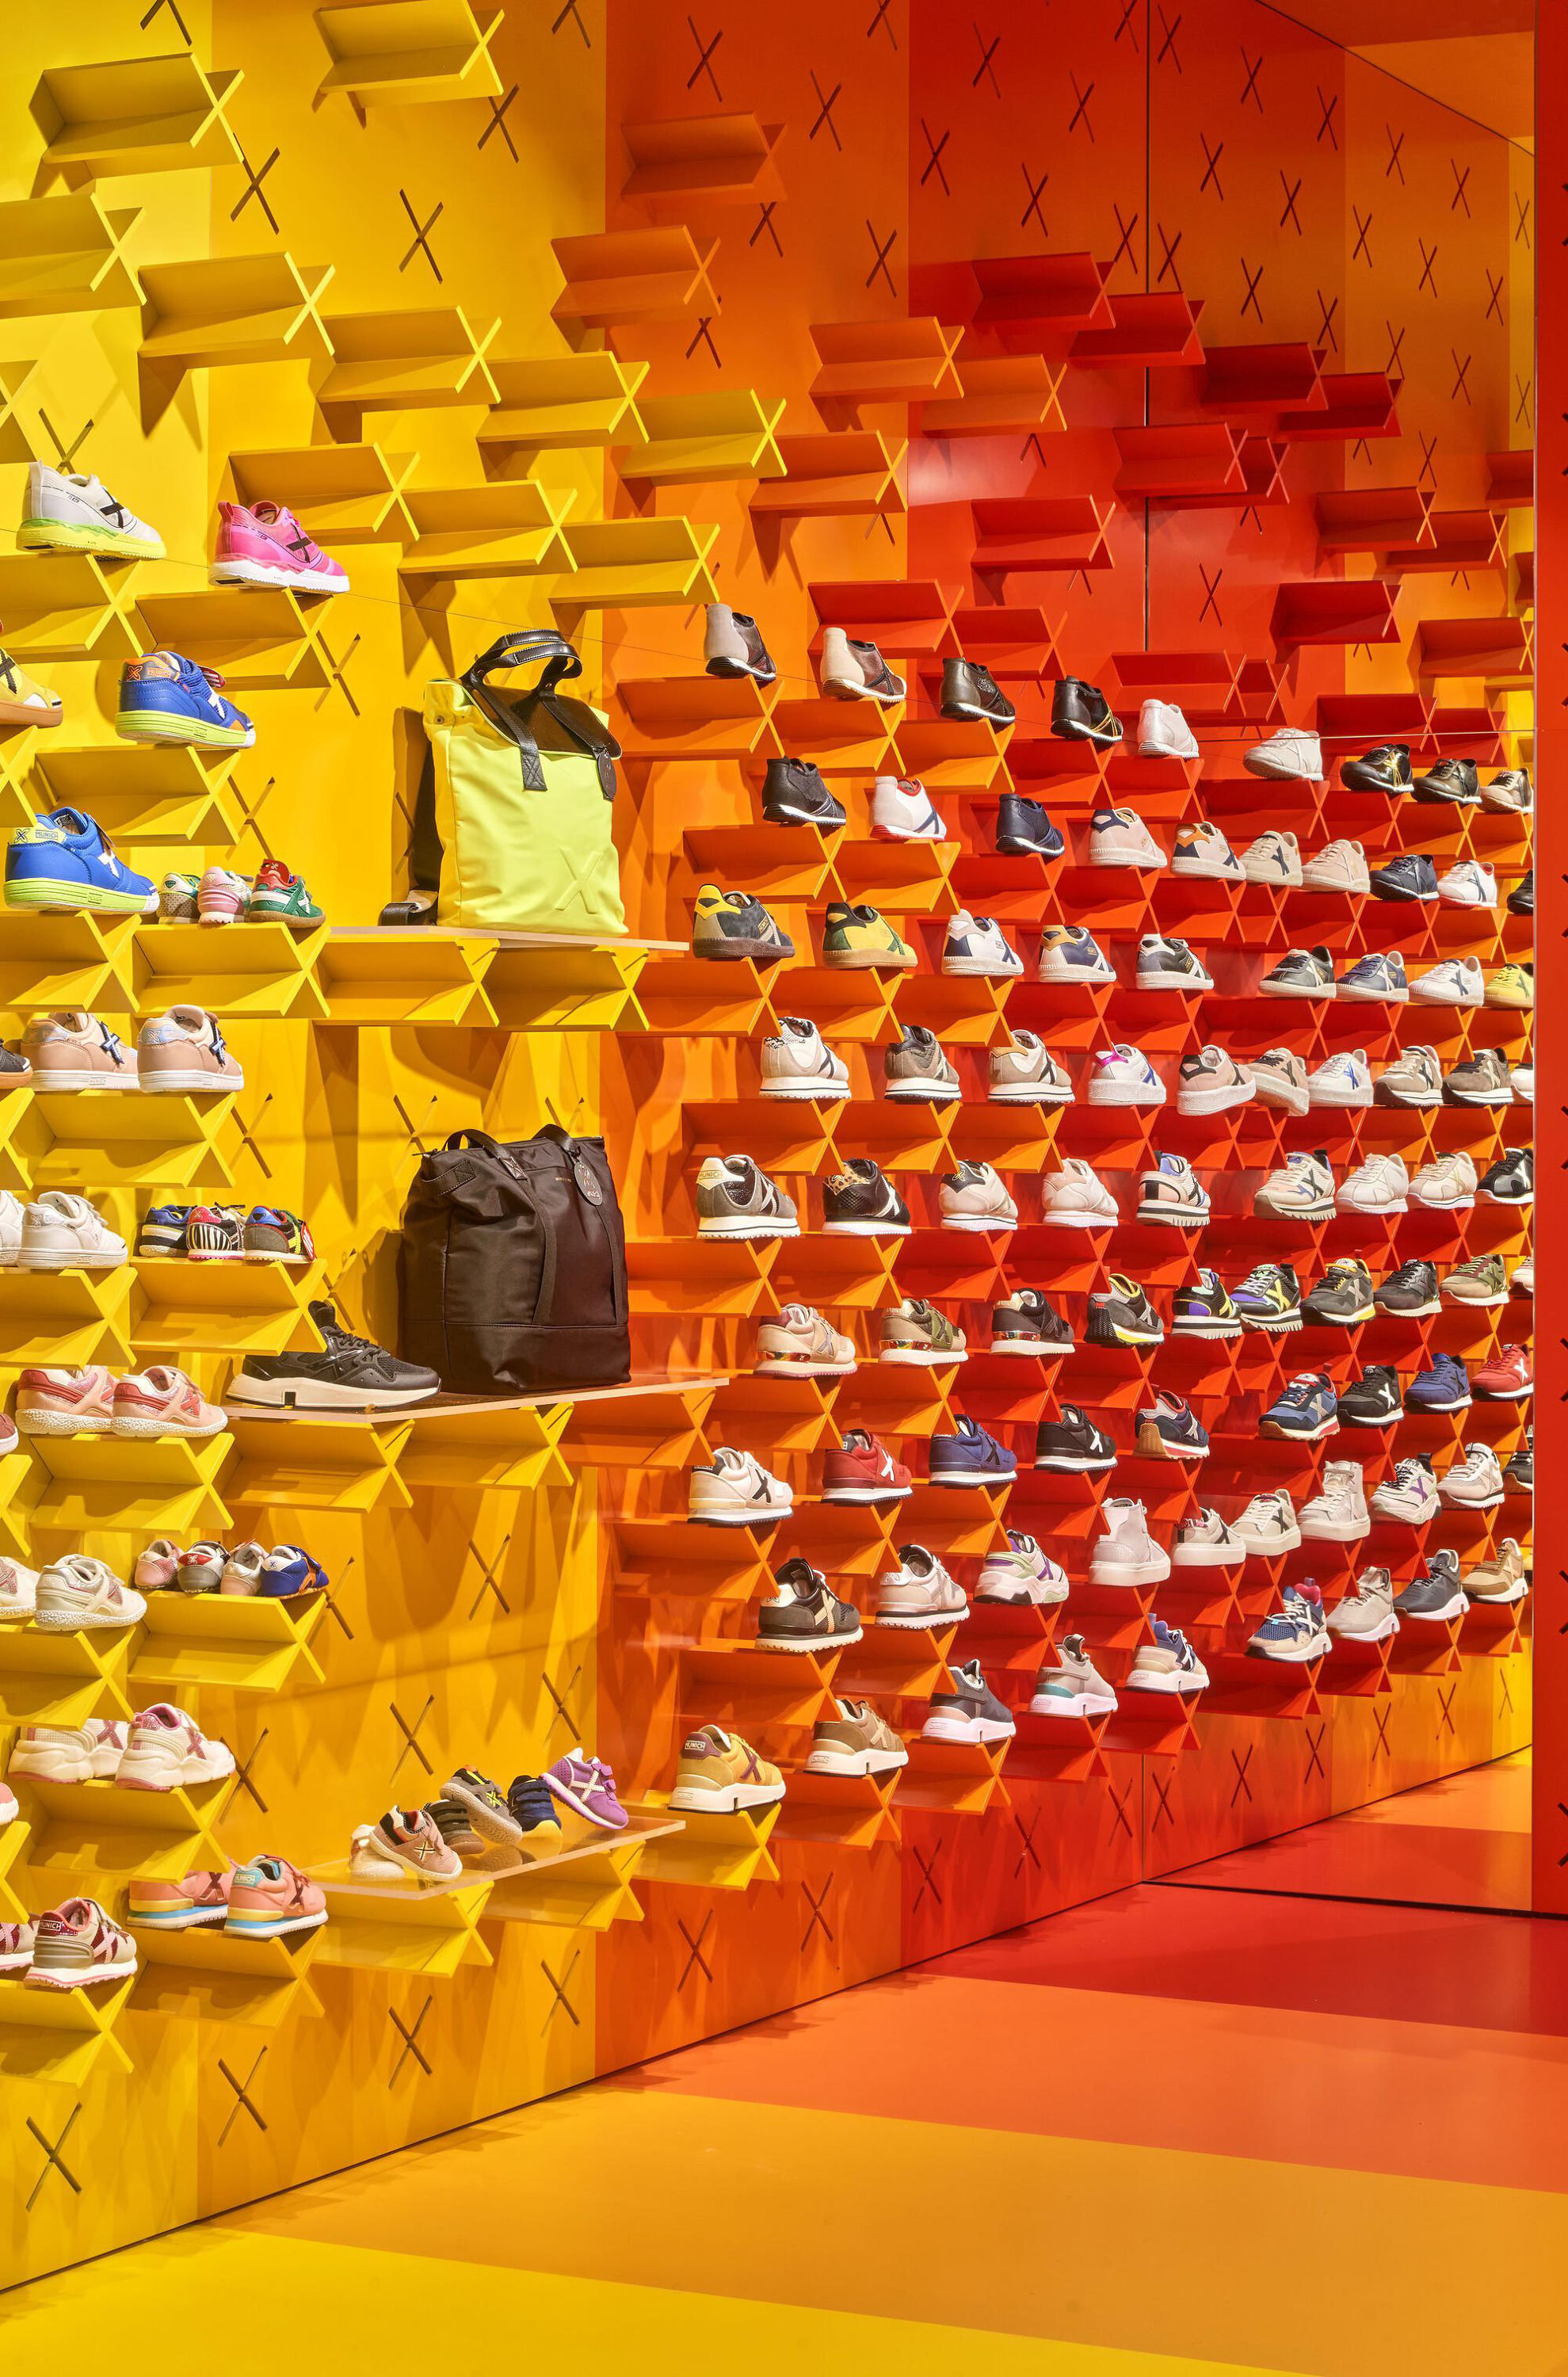 Tread lightly: shoe stores with brand-focused lighting concepts